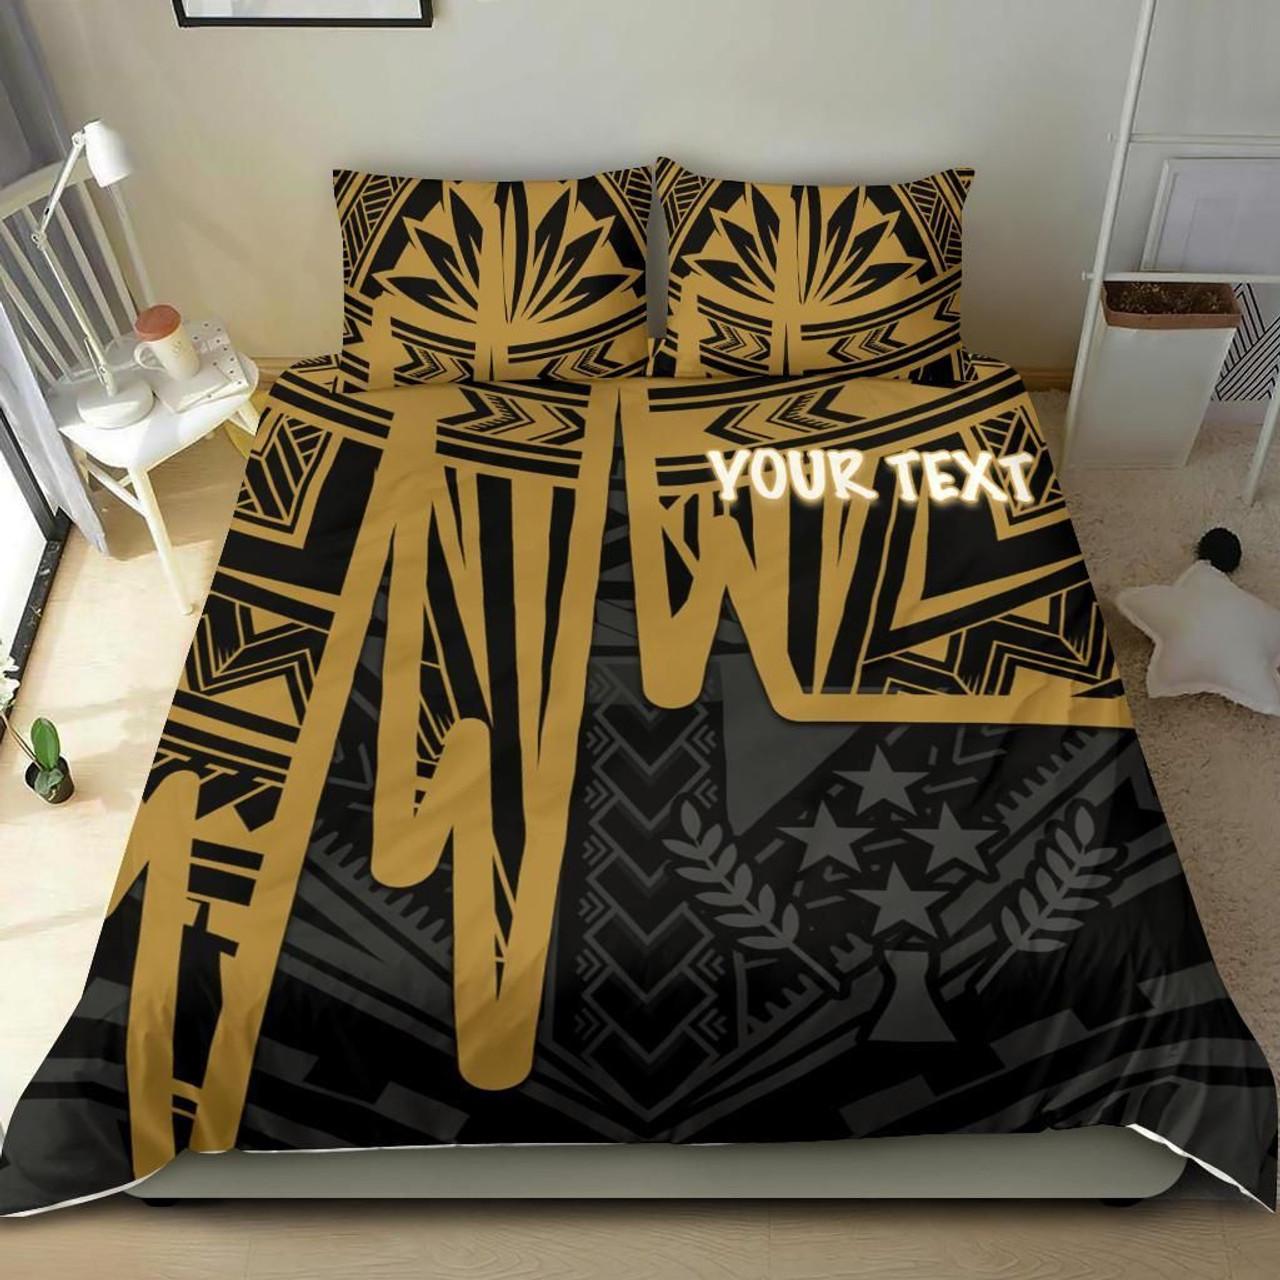 Kosrae Personalised Bedding Set - Kosrae Seal In Heartbeat Patterns Style (Gold) 2